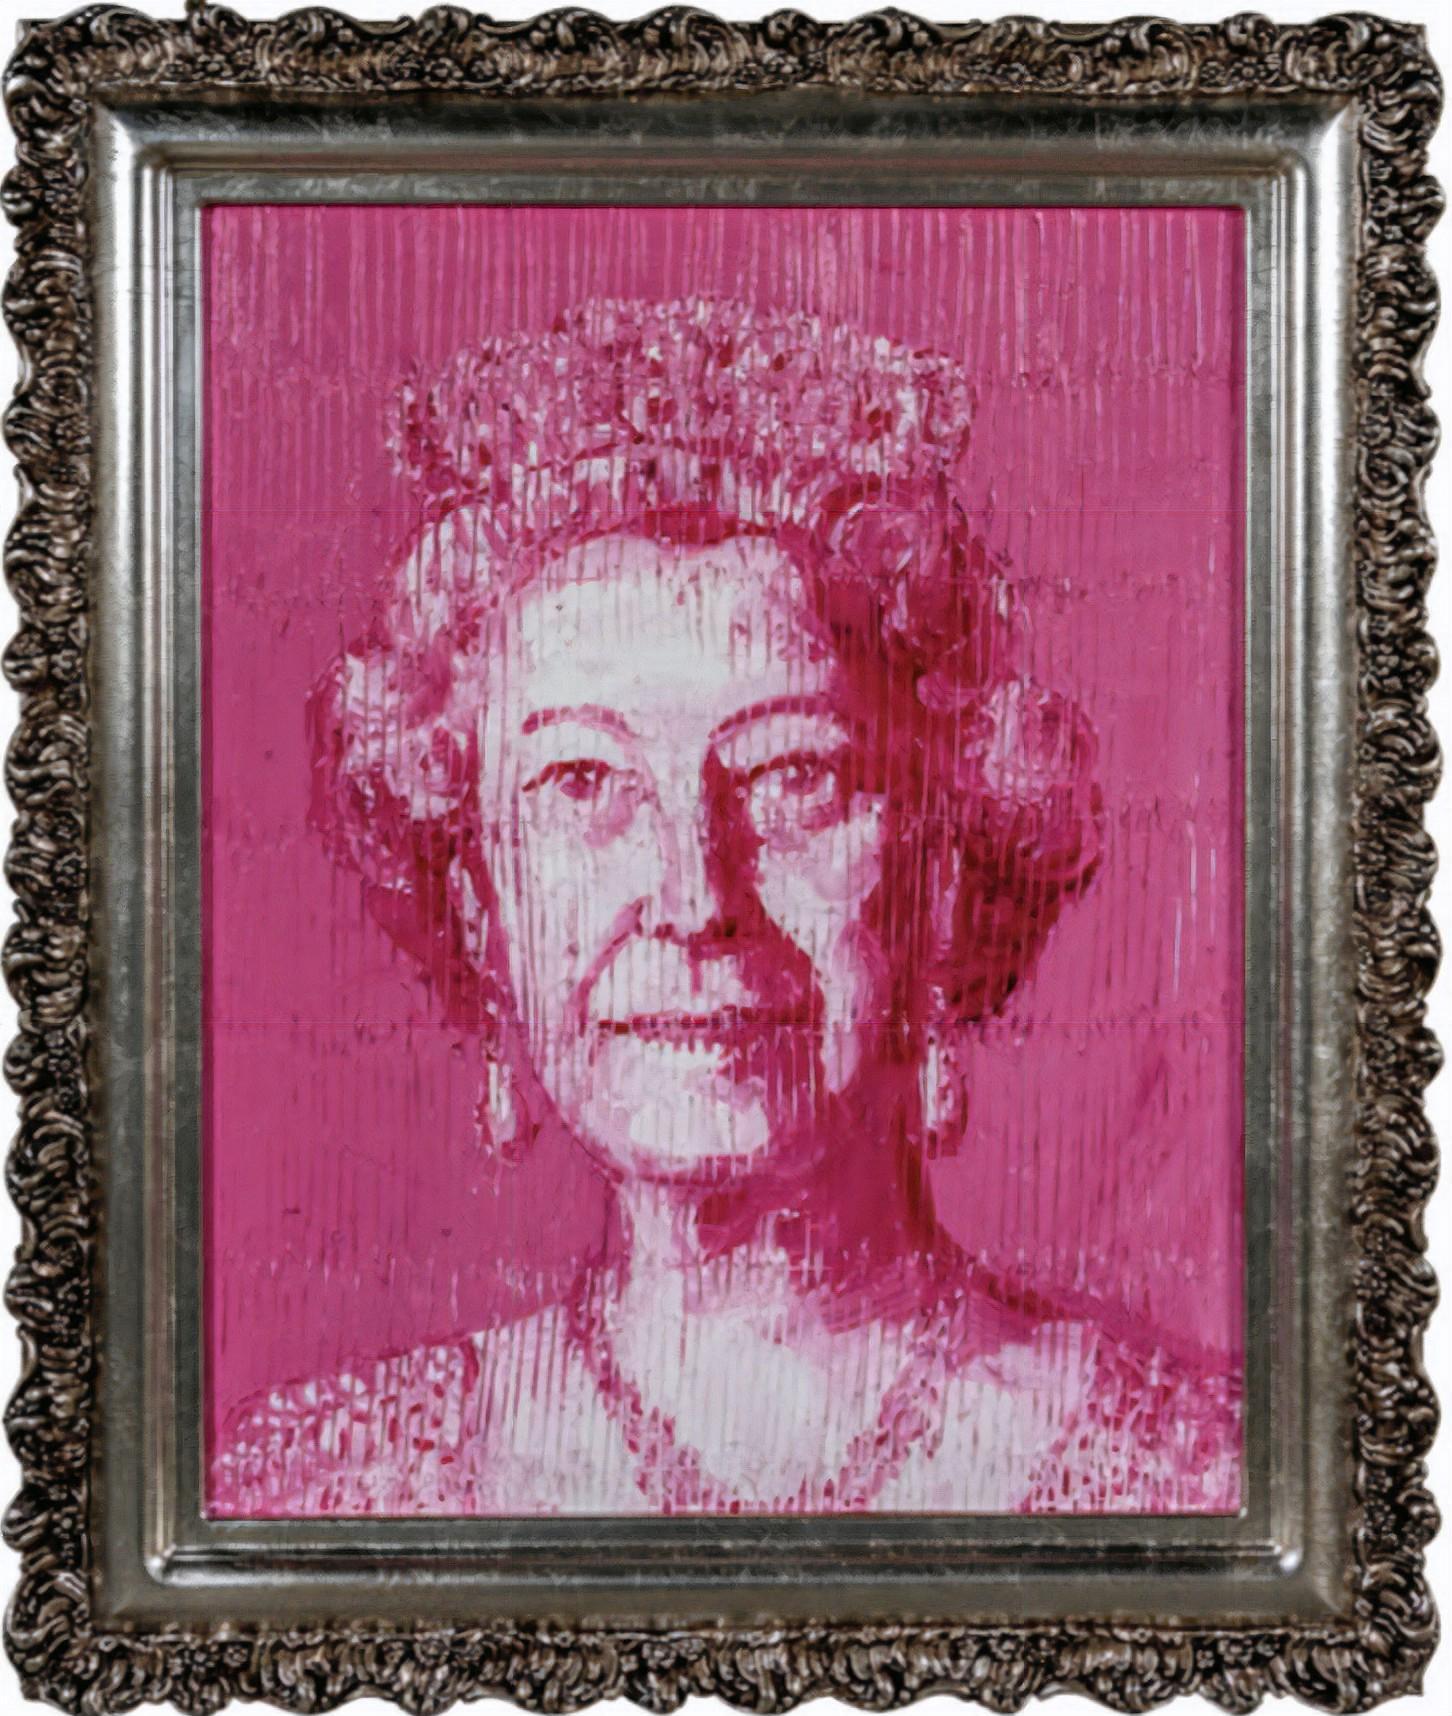 Her Majesty - Painting by Hunt Slonem